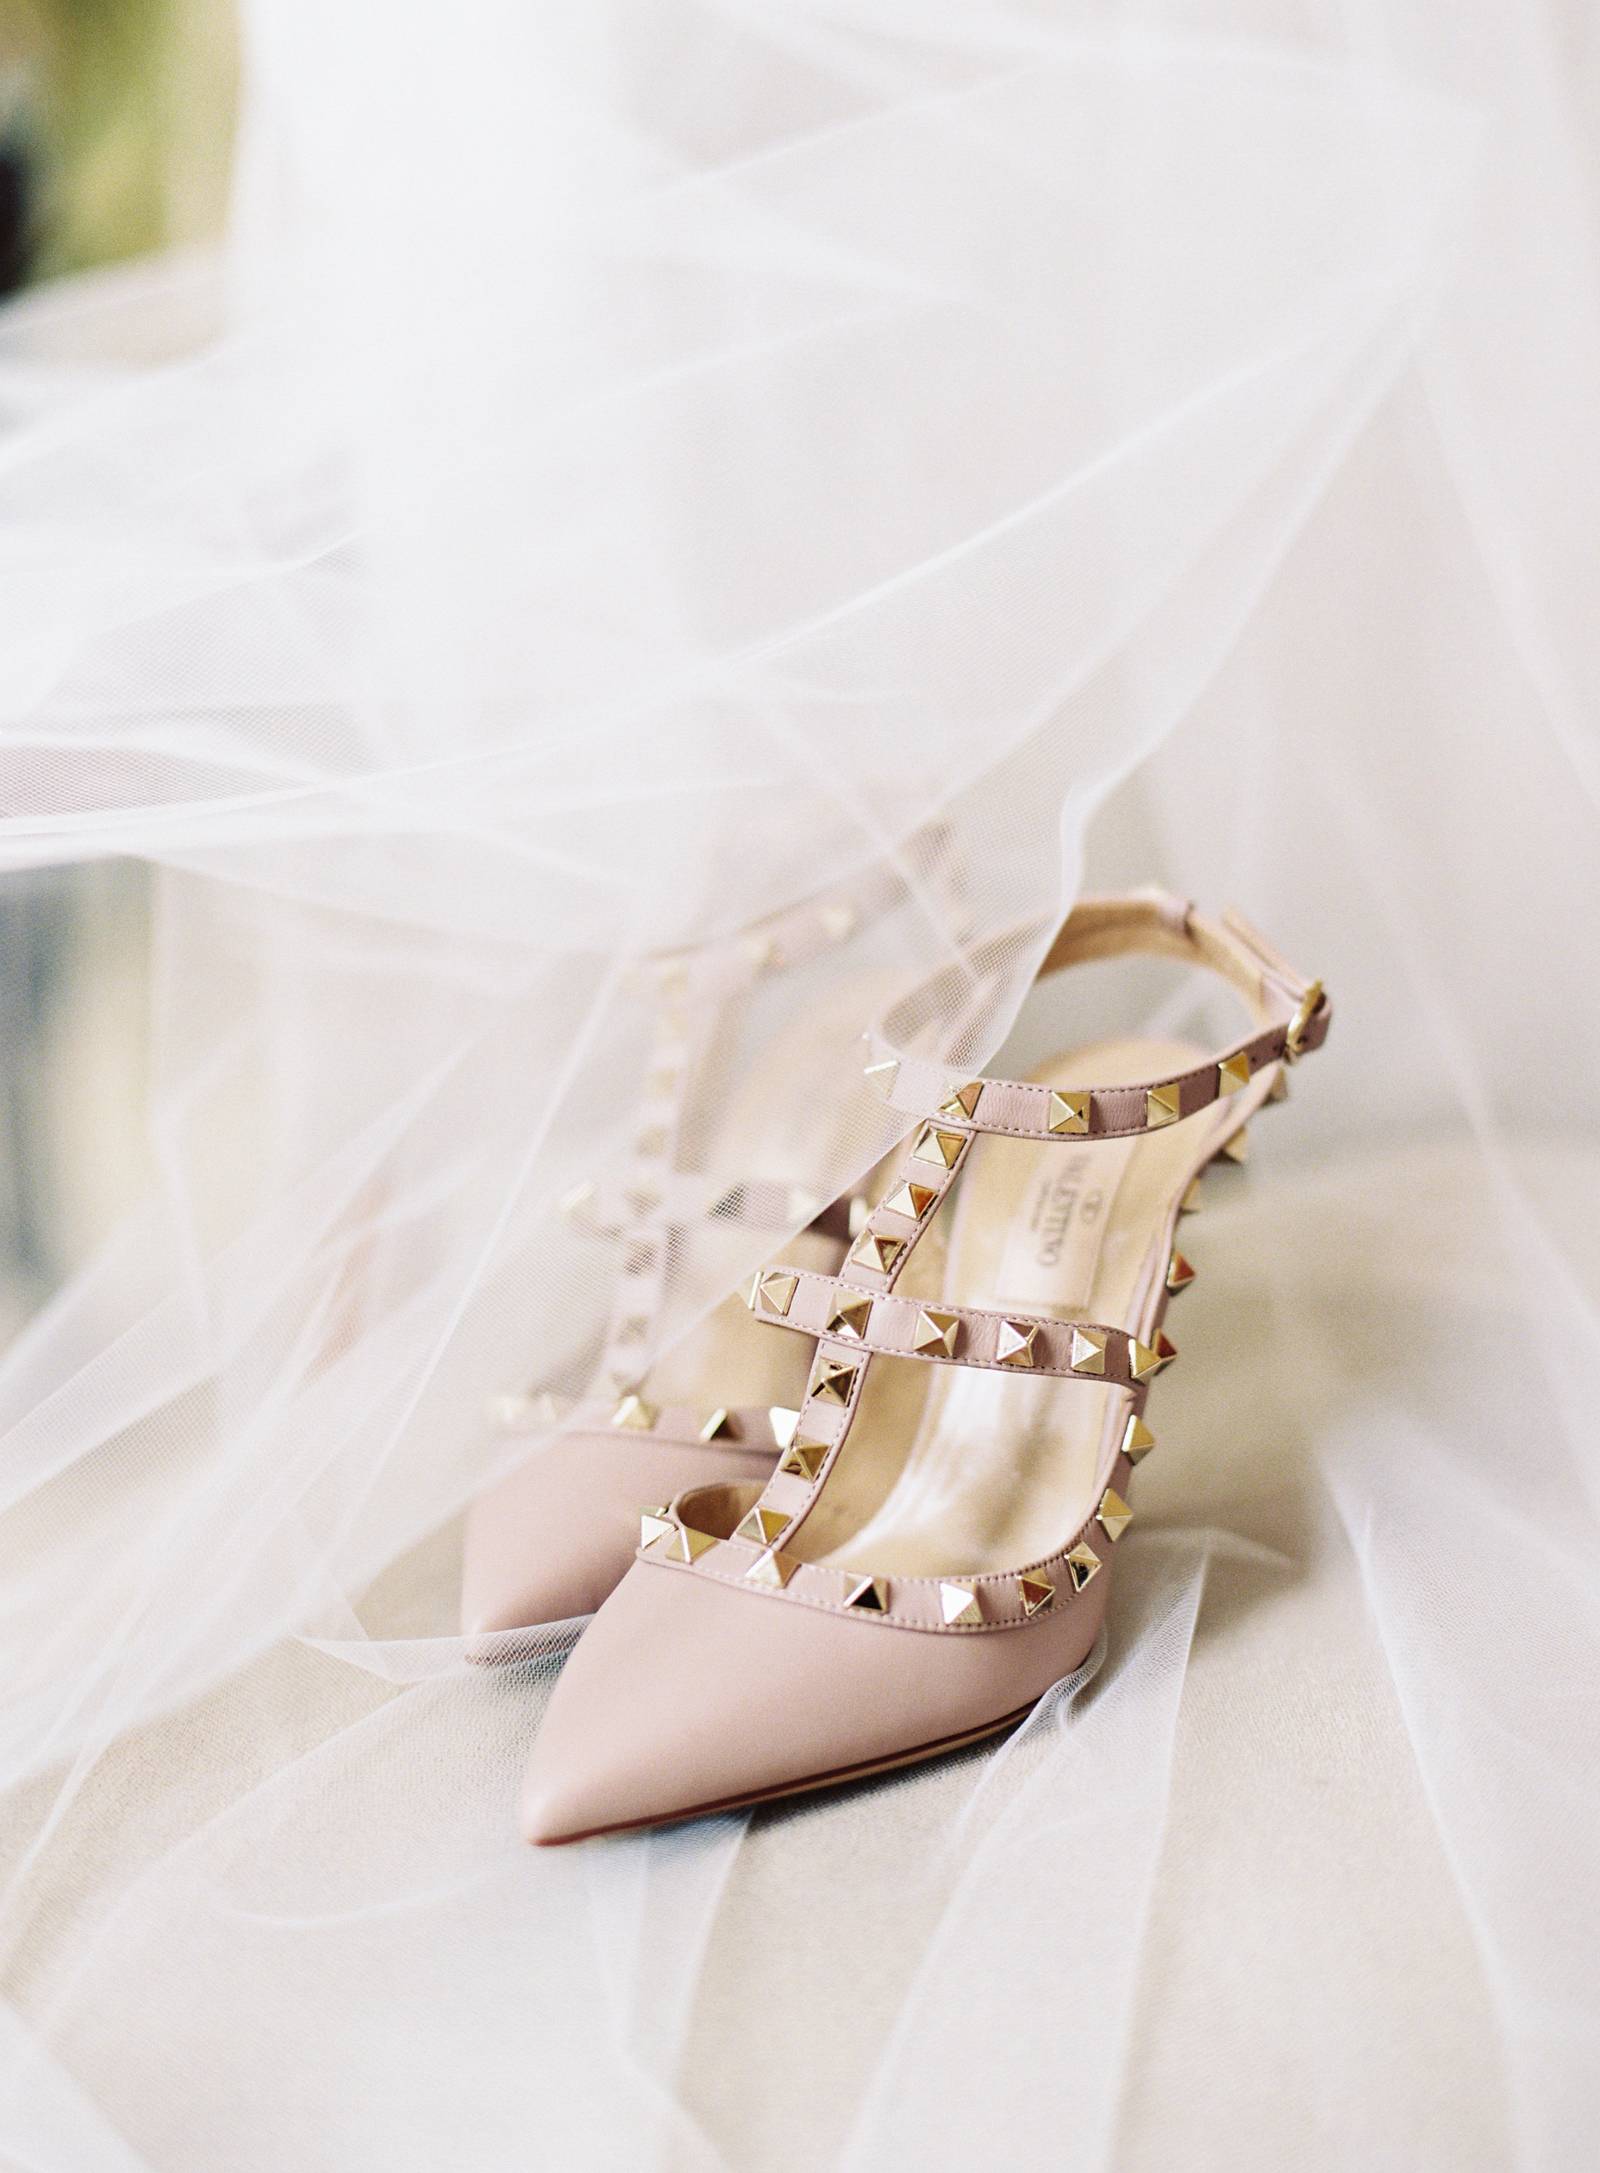 Virginia Wedding blending classic tradition with modern flair ...